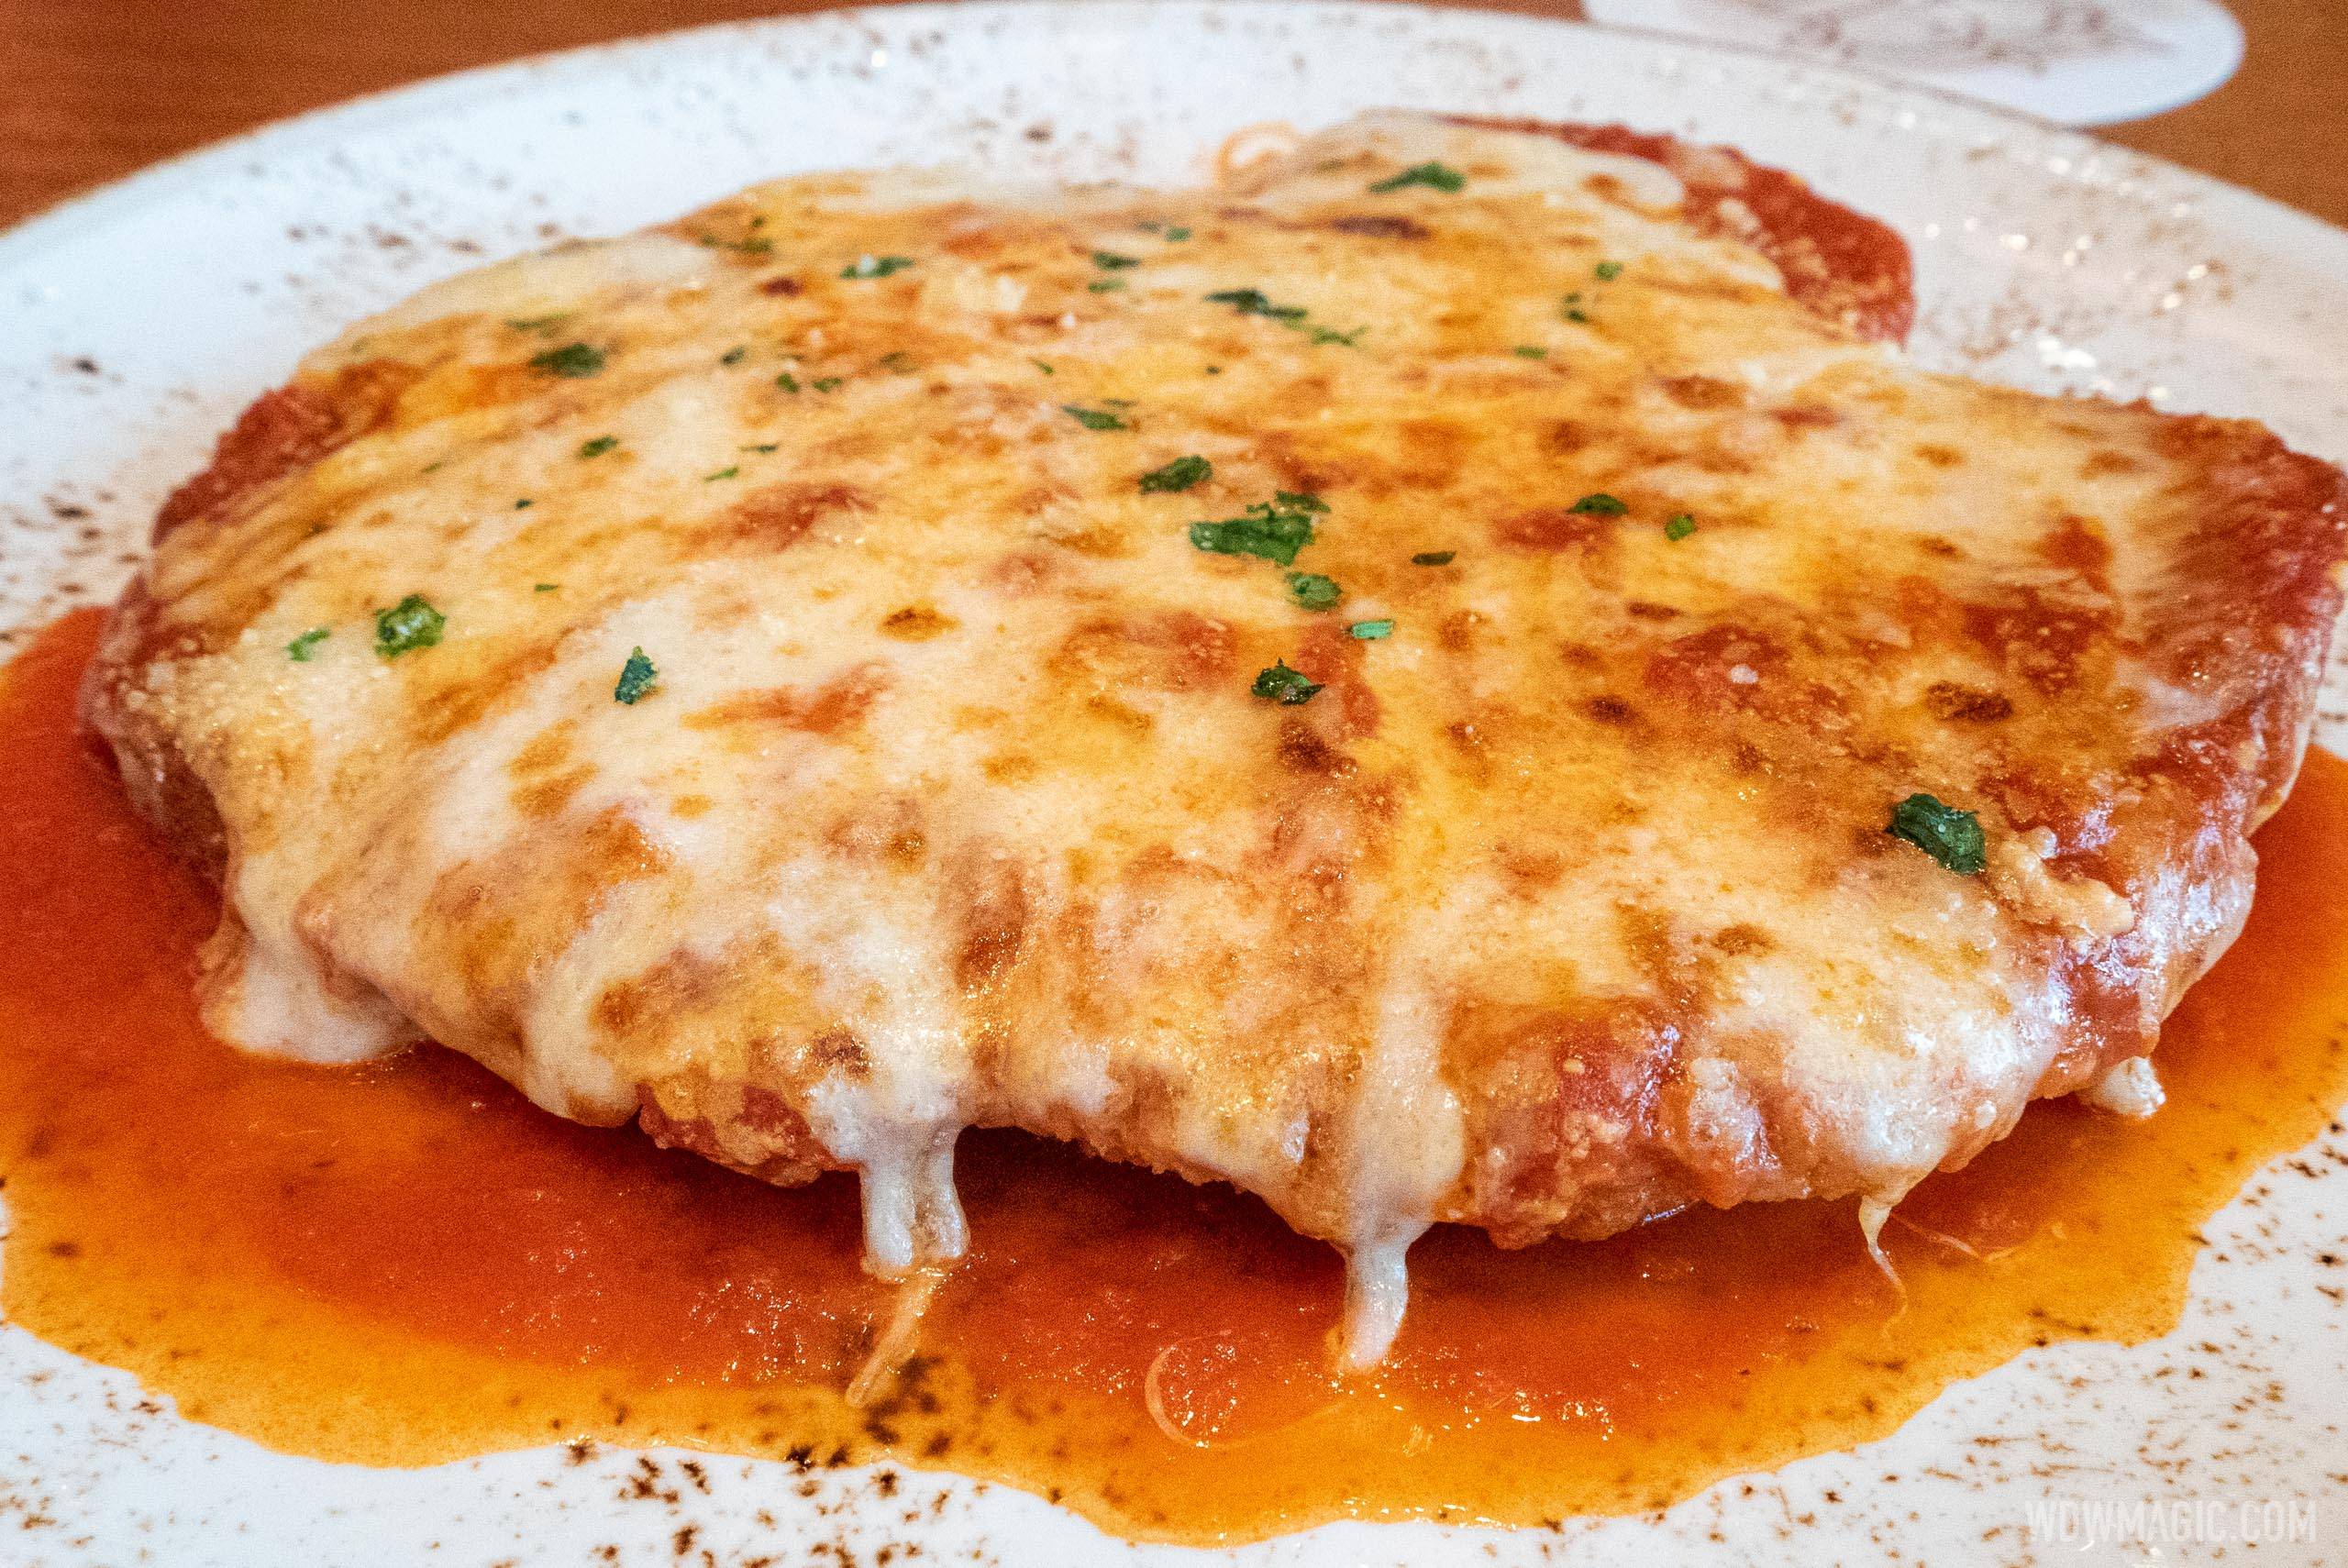 Maria and Enzo's is offering 20 percent off their excellent Pollo Alla Parmigiana